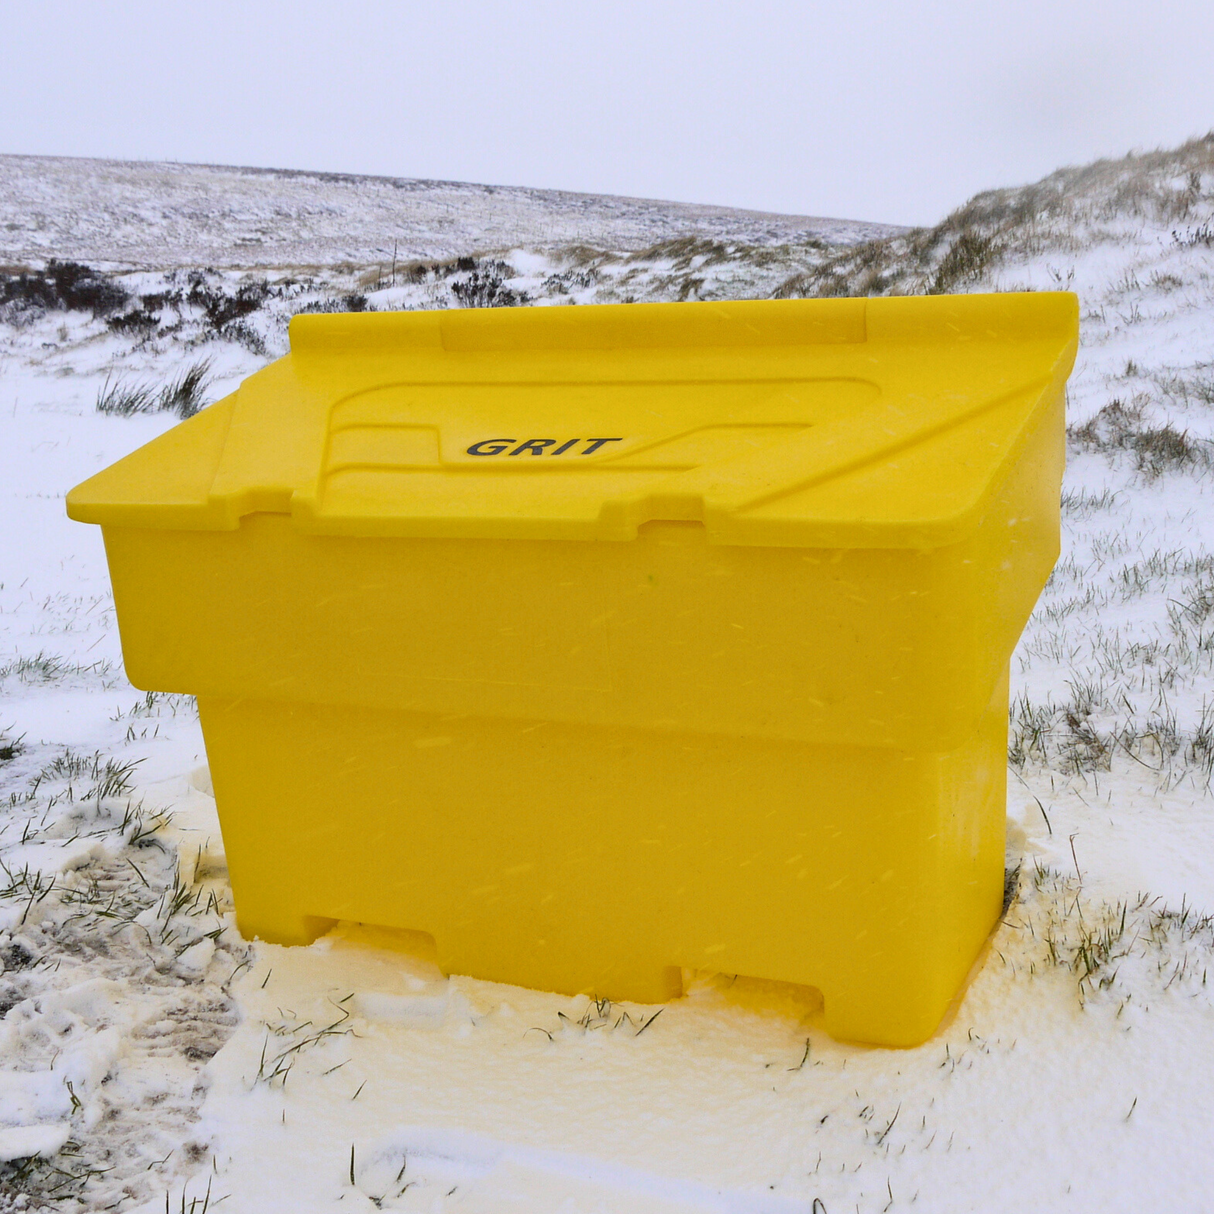 Rock Salt Grit Bins, Nationwide Fast Delivery from Dandy's